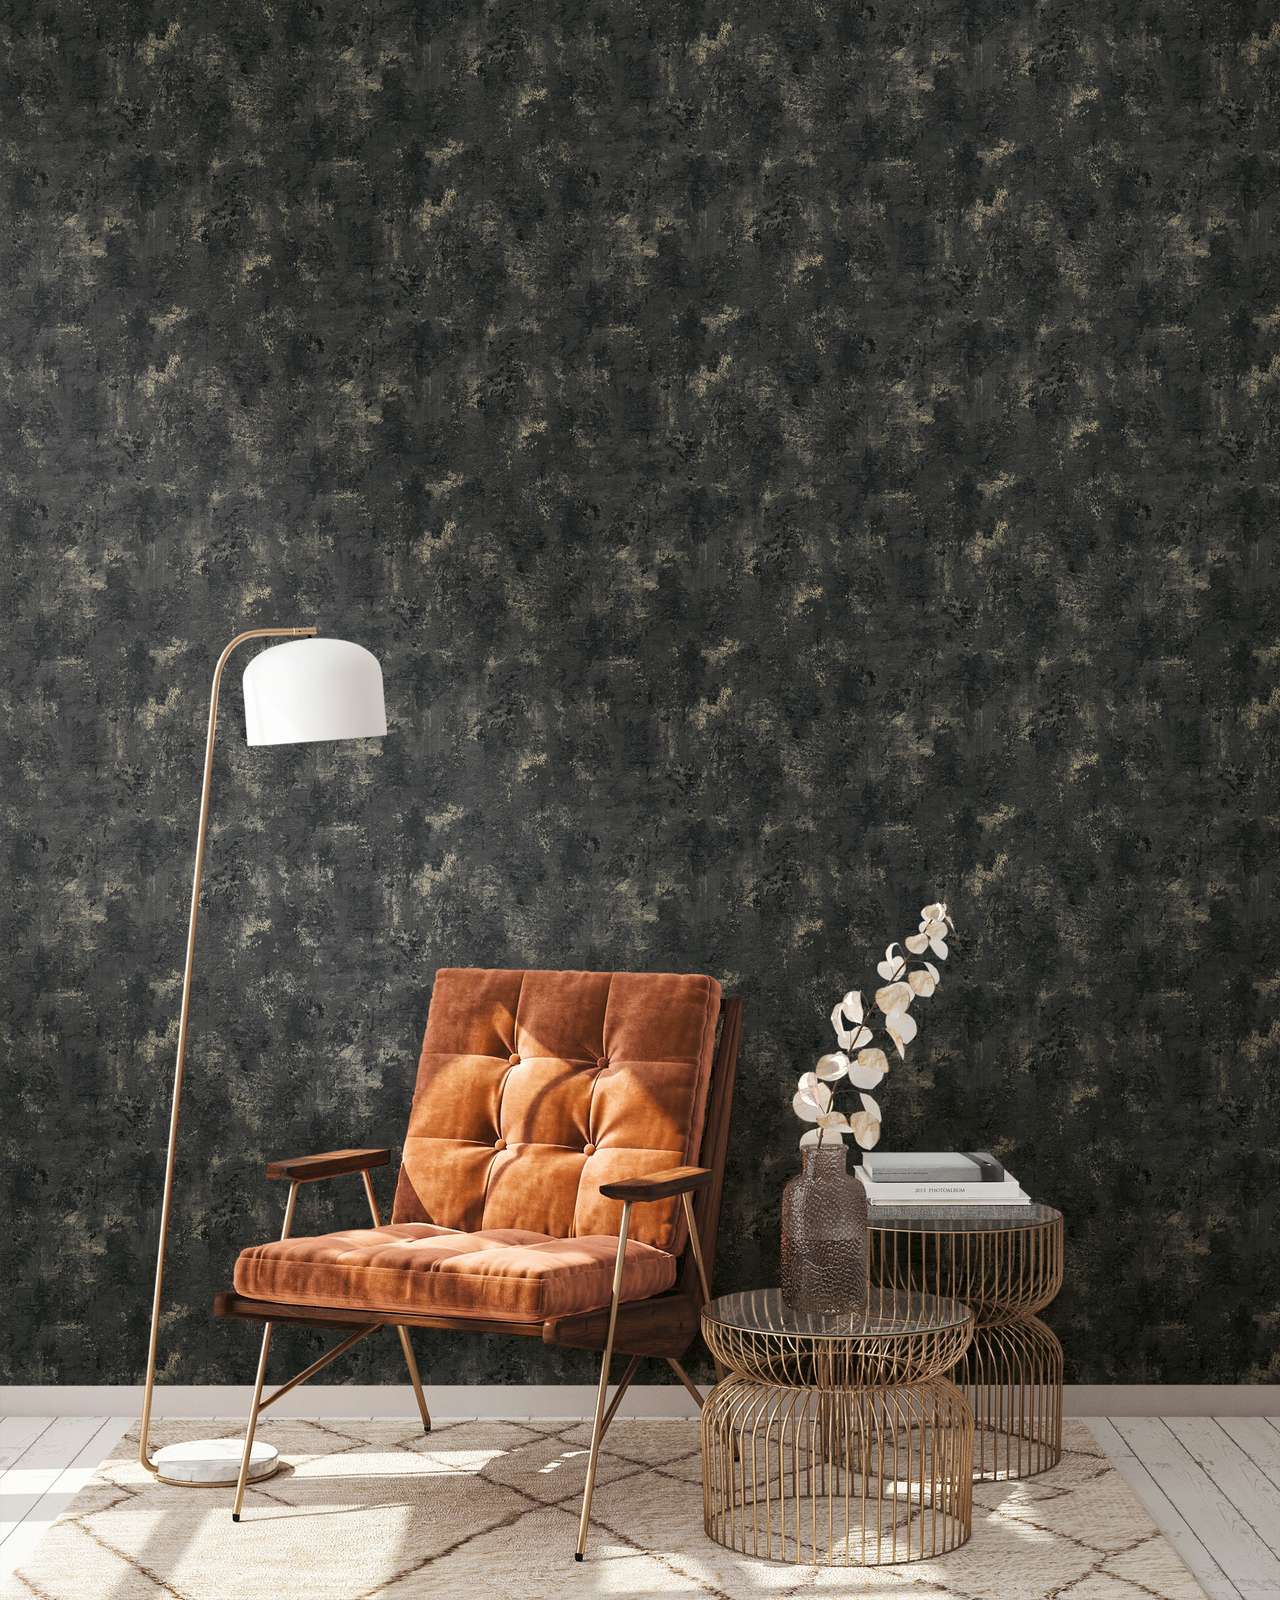             Black textured wallpaper with rustic concrete look
        